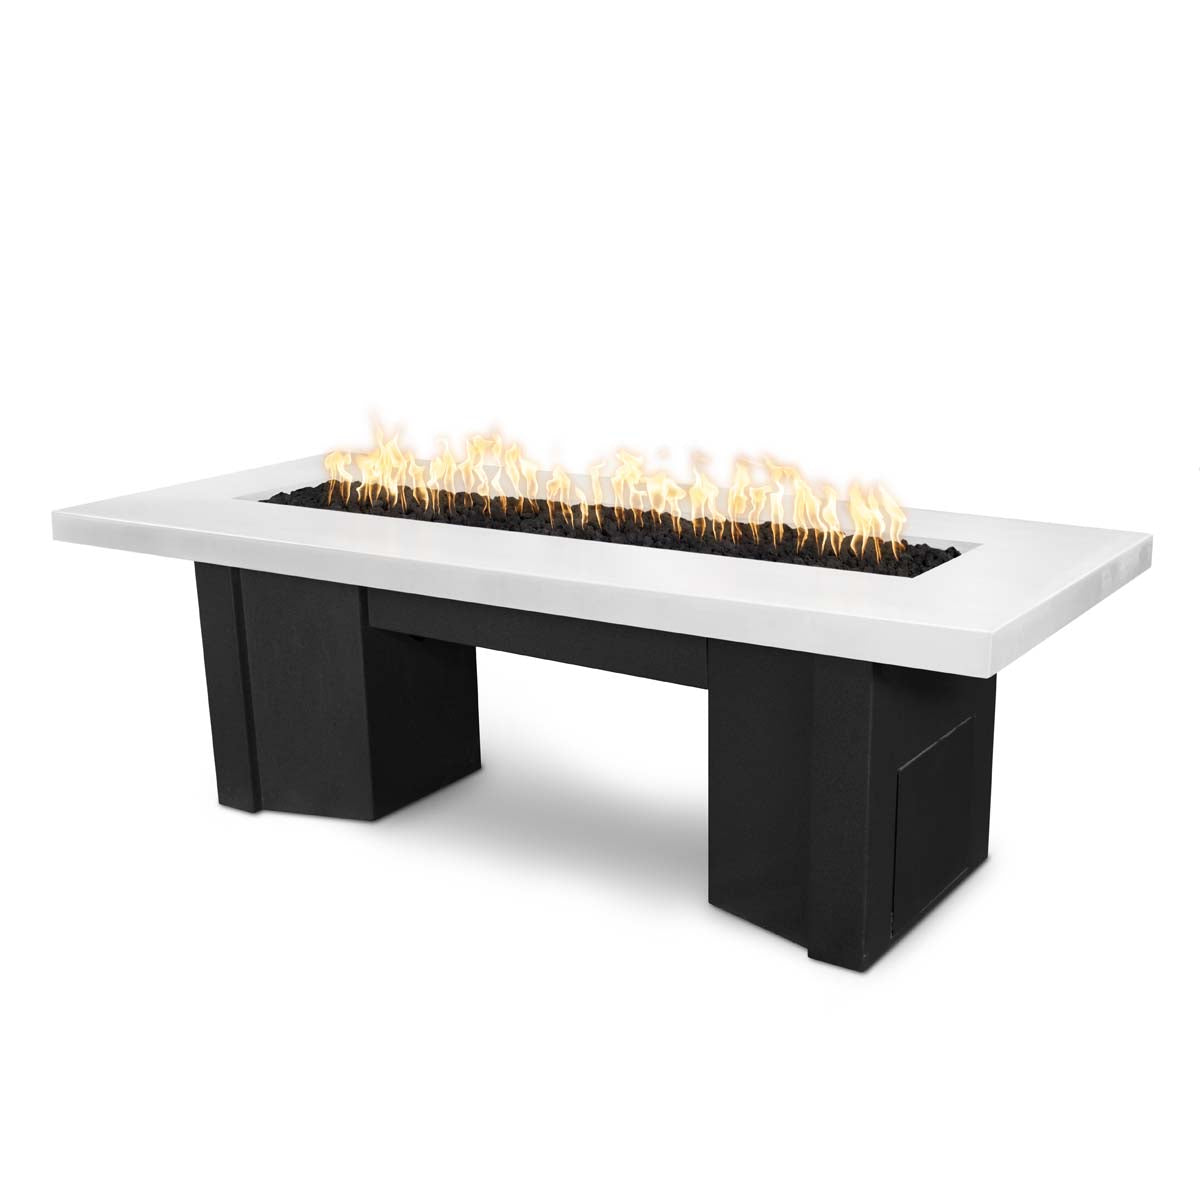 The Outdoor Plus Rectangular Alameda 78" Black & White Powder Coated Natural Gas Fire Pit with Match Lit Ignition